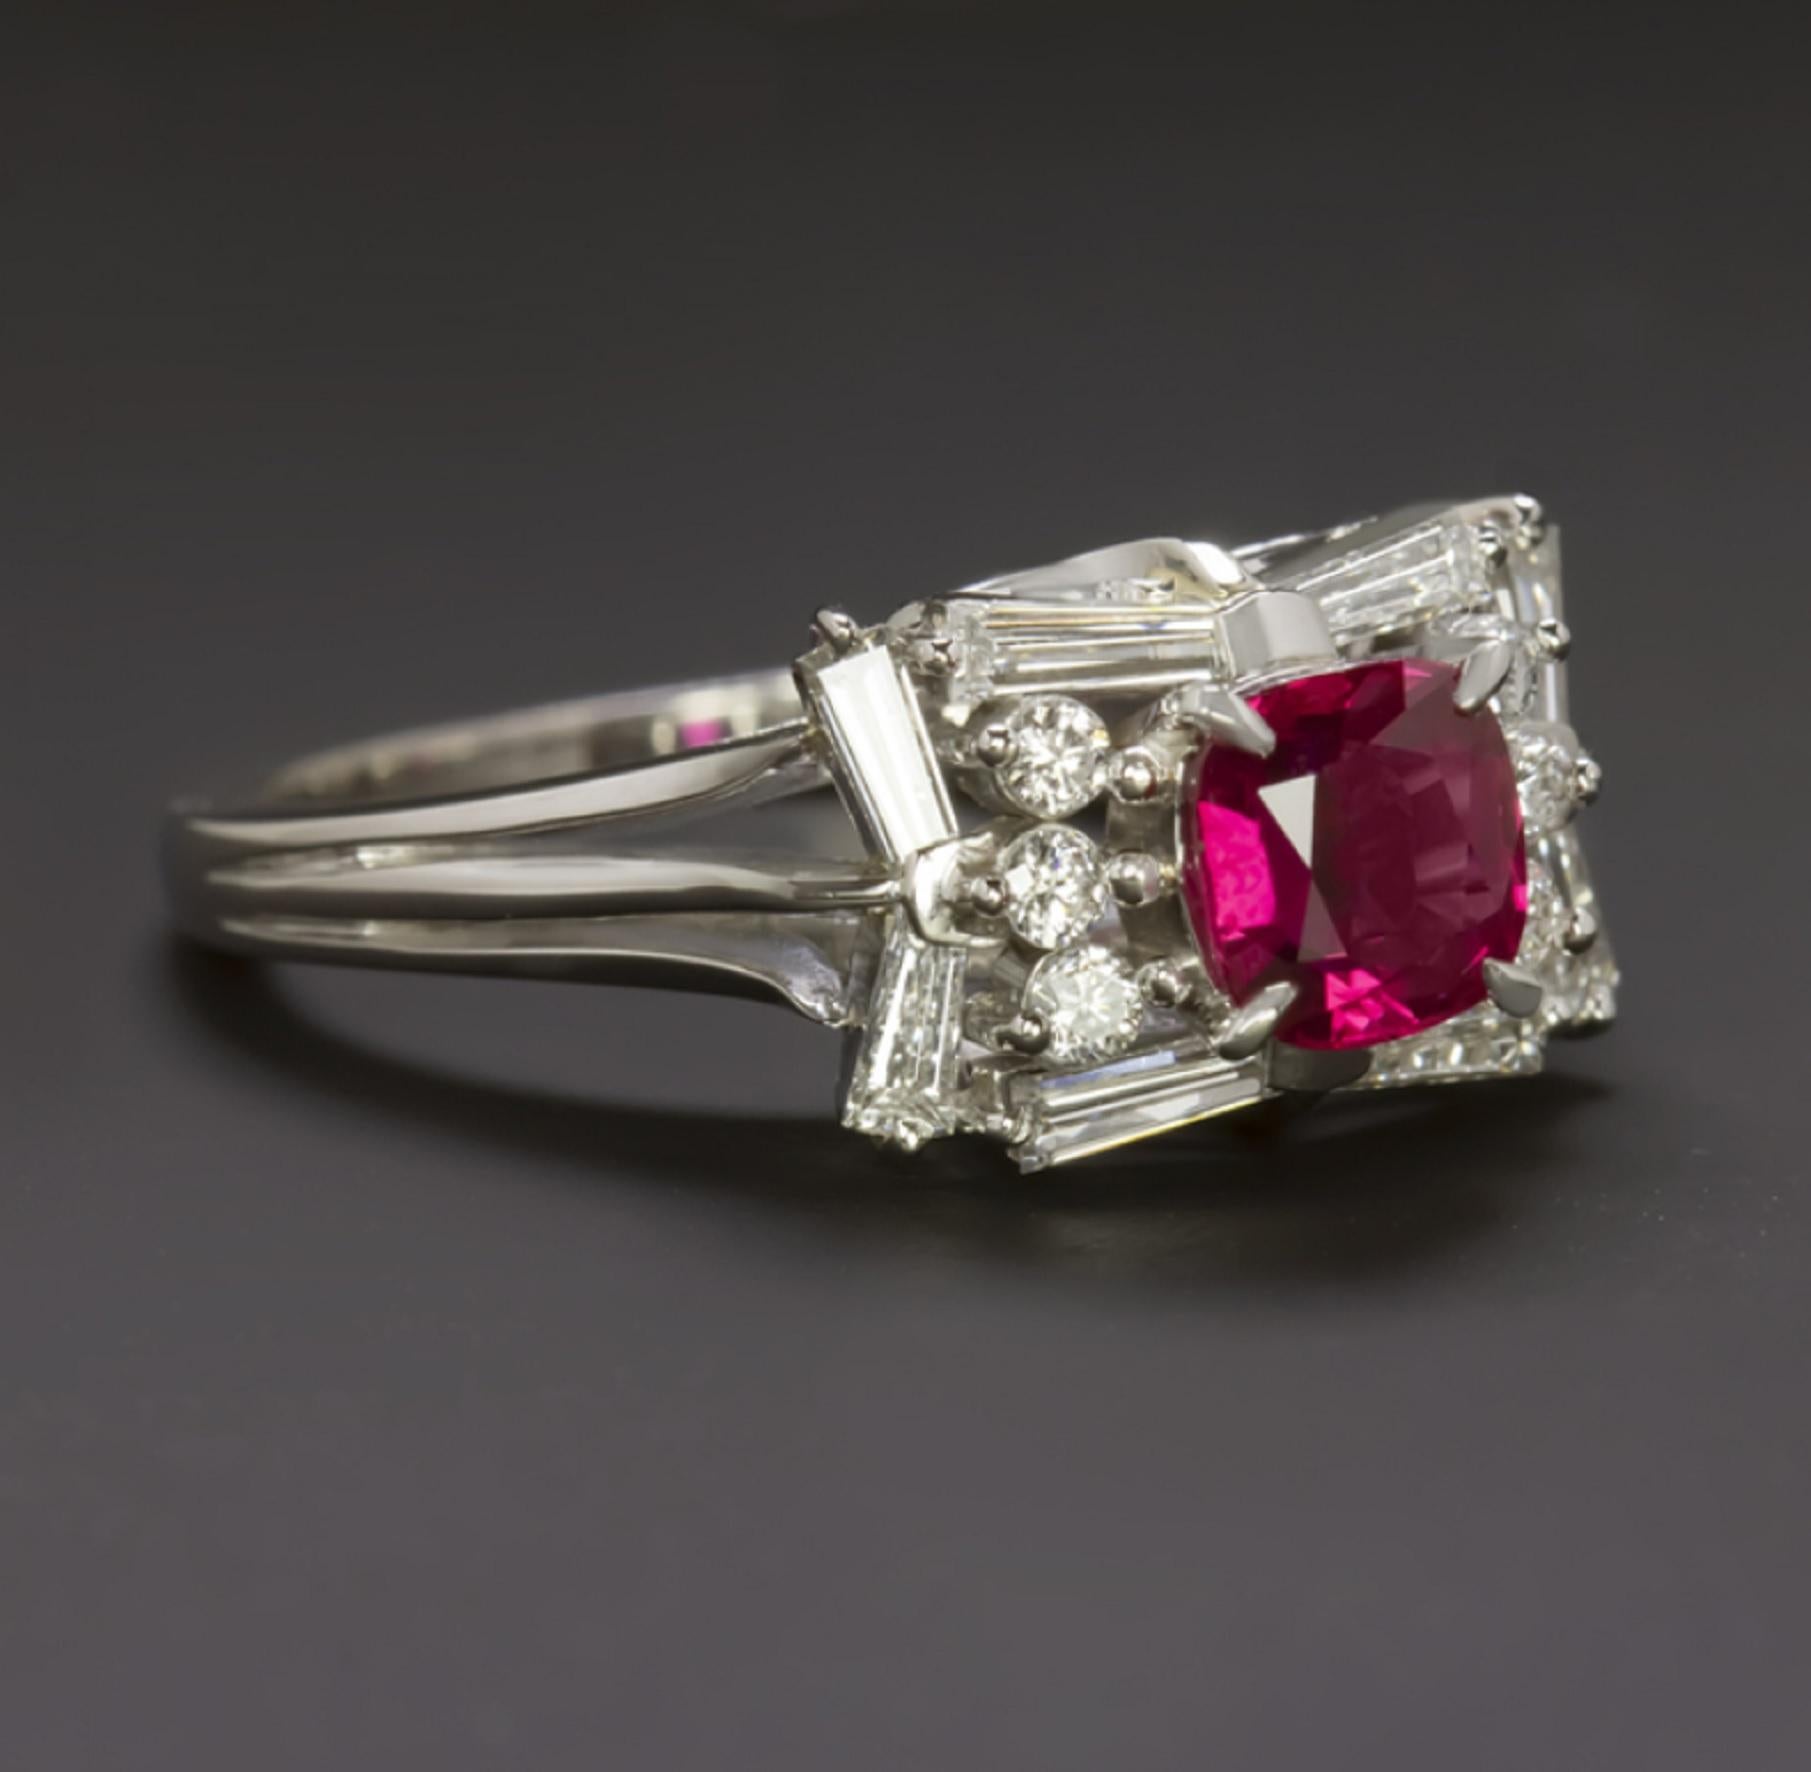 Striking and high quality, this ring has an air of glamour and luxury! The round ruby center stone weighs 1.12cts and is beautiful in color with a rich true red hue. The ruby is translucent, allowing light to pass through and making it particularly